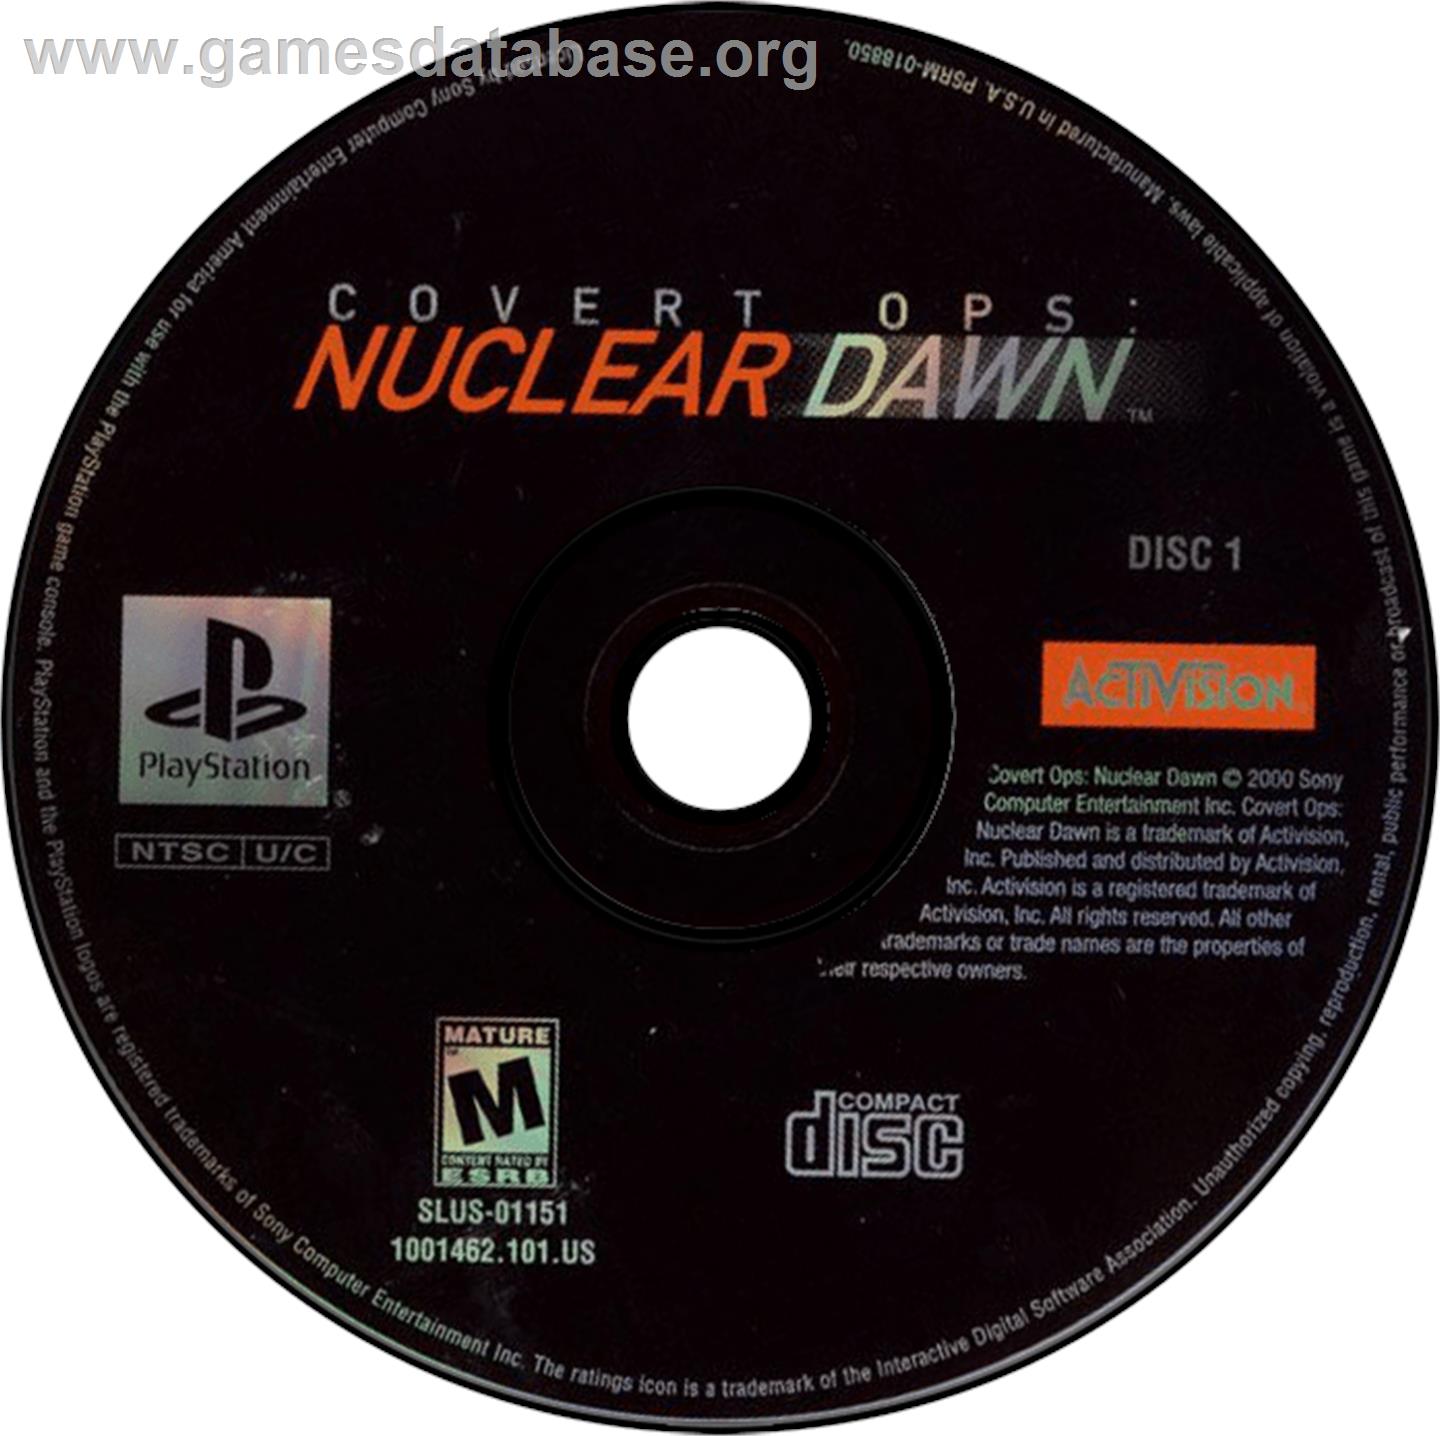 Covert Ops: Nuclear Dawn - Sony Playstation - Artwork - Disc